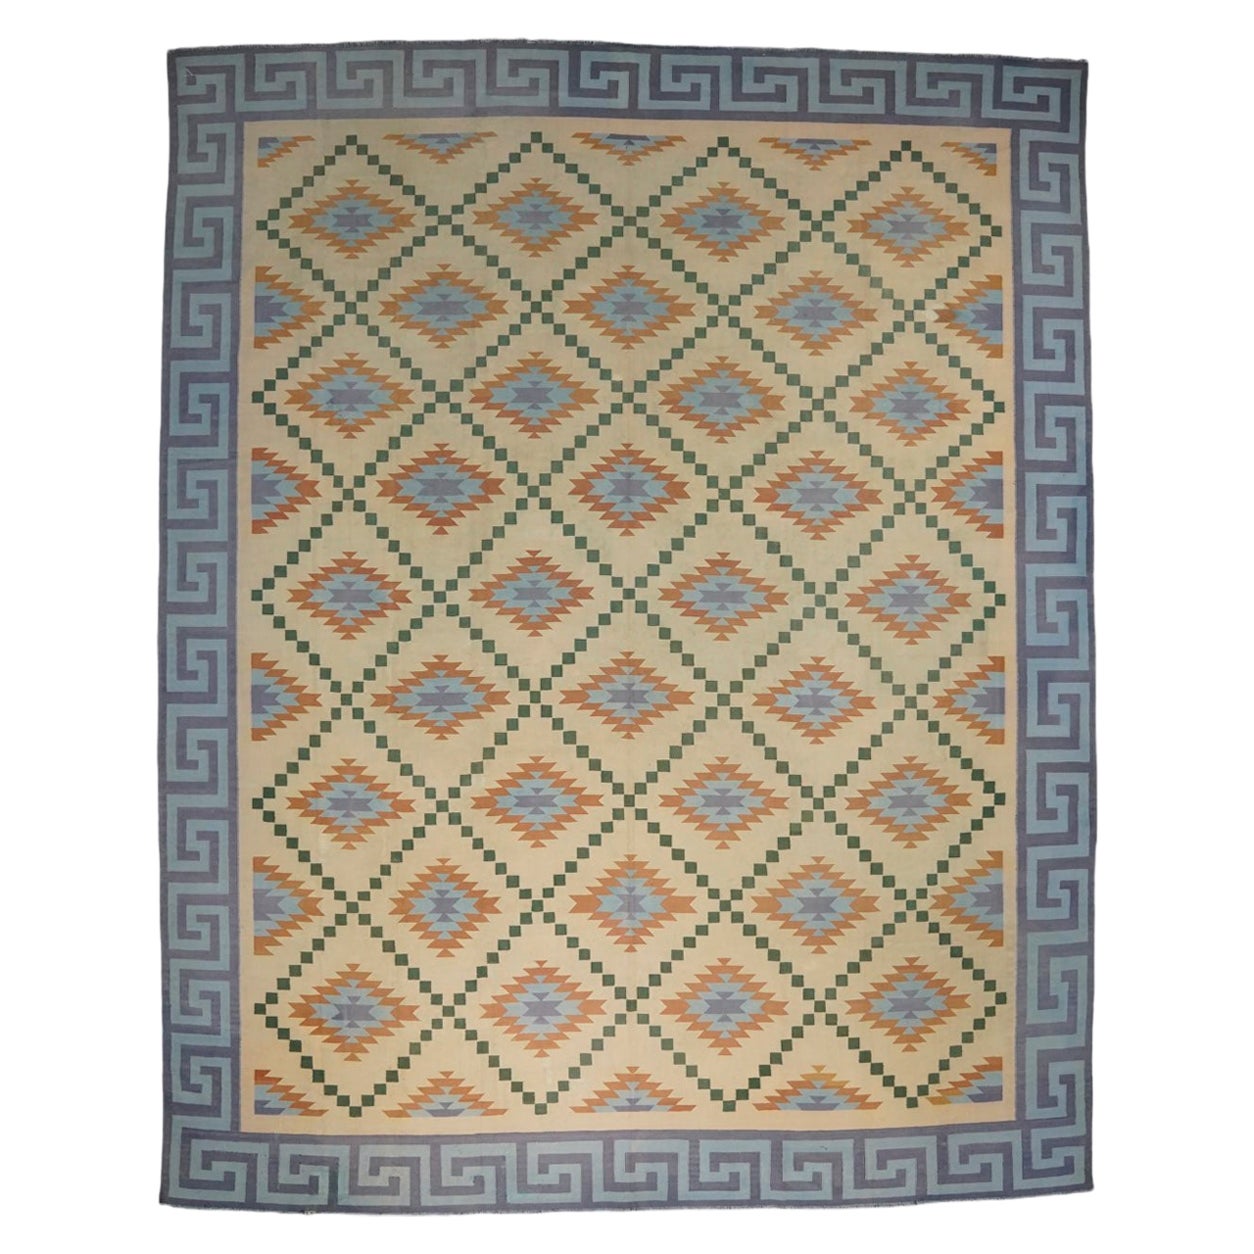 Vintage Dhurrie Rug in Cream with Blue Geometric Patterns, from Rug & Kilim    For Sale